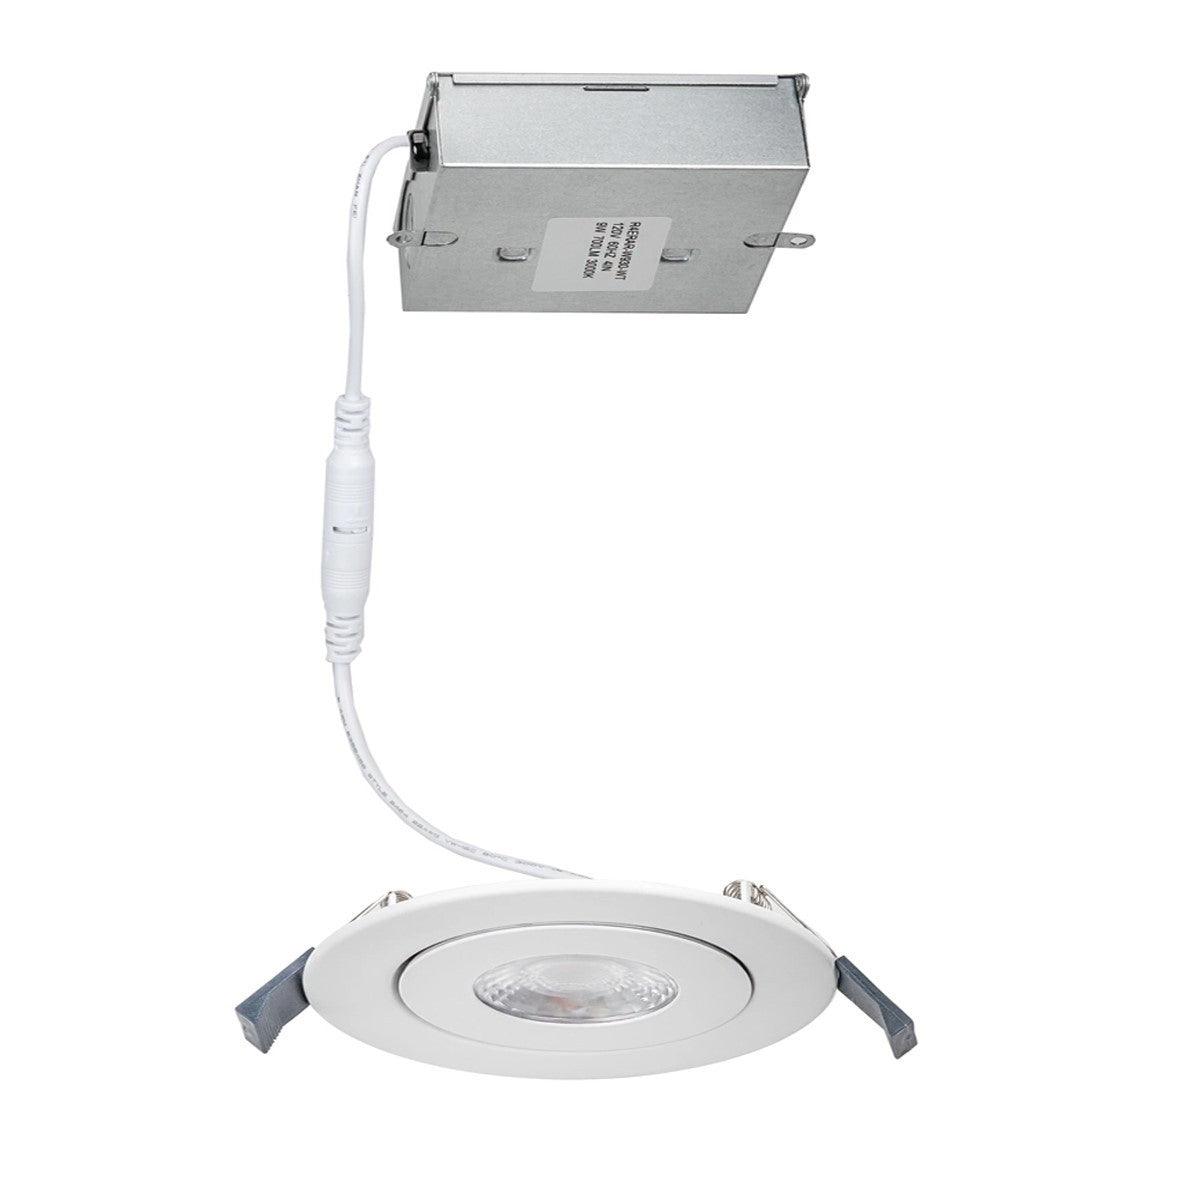 6 In. Lotos LED Adjustable Canless LED Recessed Light, 15 Watt, 1340 Lumens, Selectable CCT, 2700K to 5000K, 120/277V